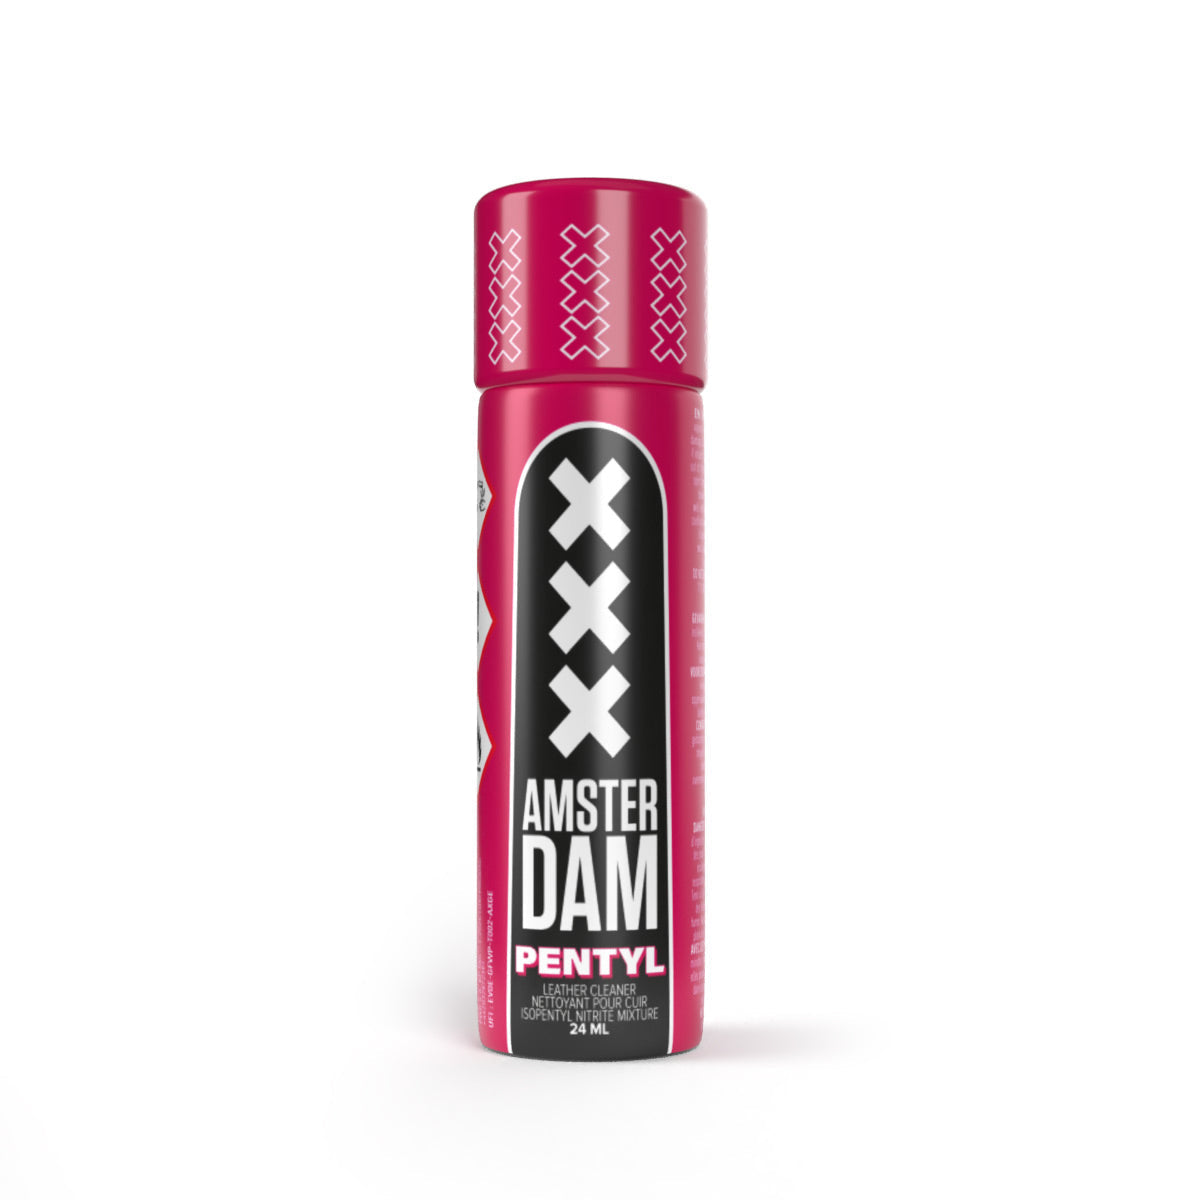 A product photo of Amsterdam Pentyl Slim Poppers.